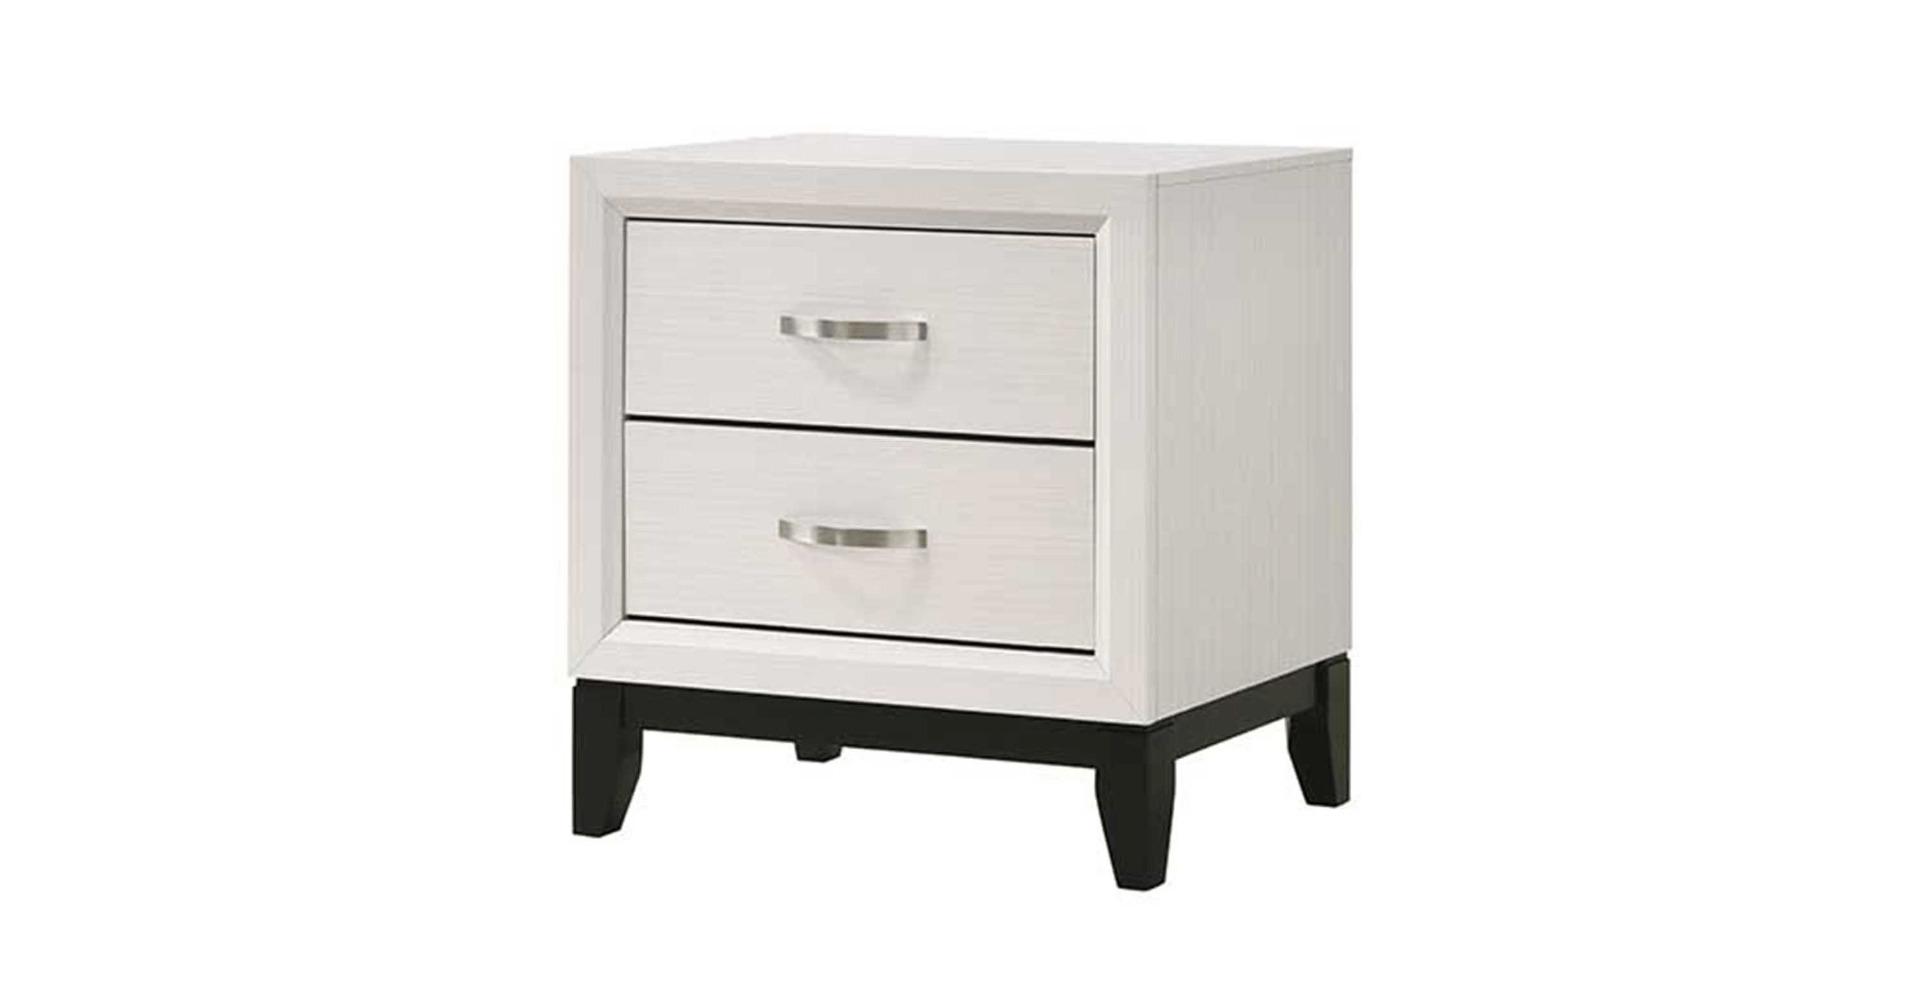 Panel Bed, Dresser, mirror, and nightstand in white finish